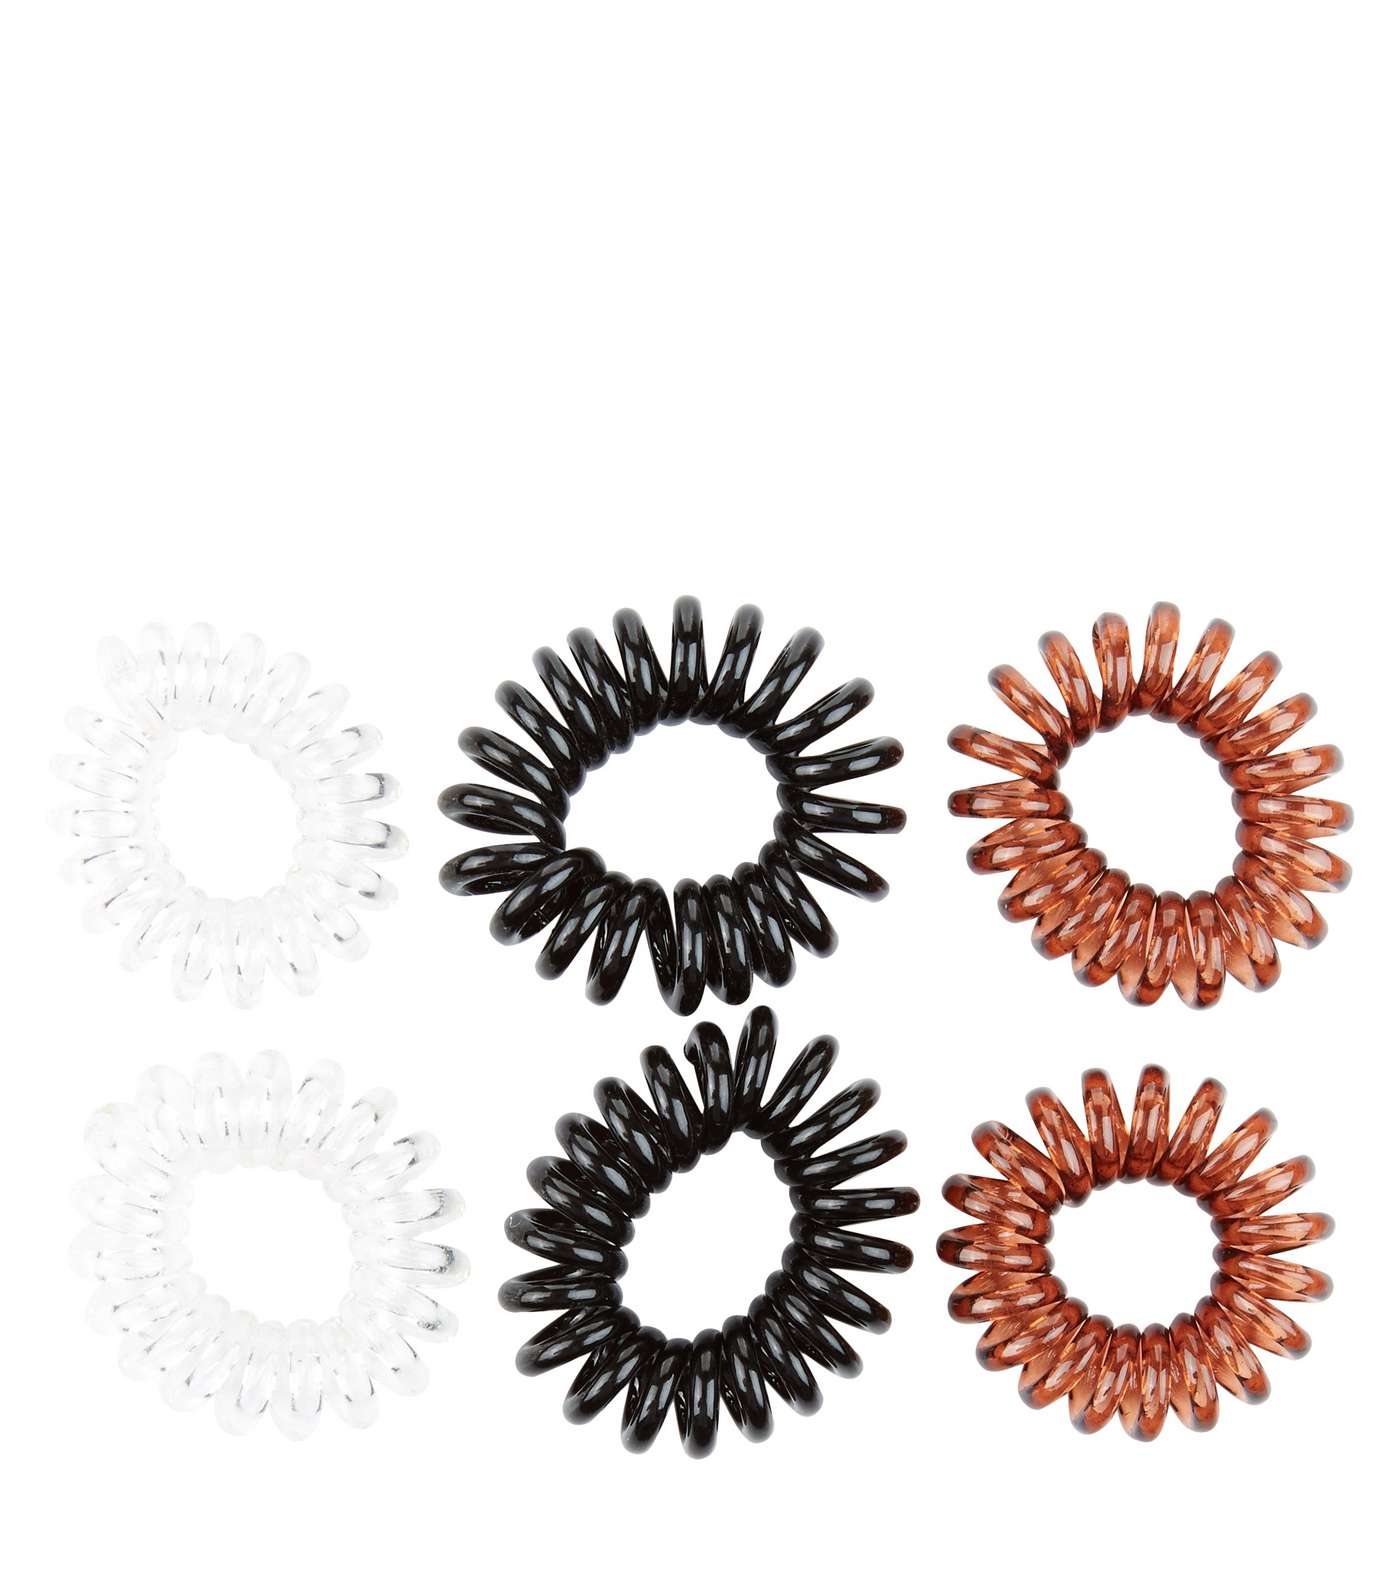 6 Pack White Black and Brown Spiral Hairbands